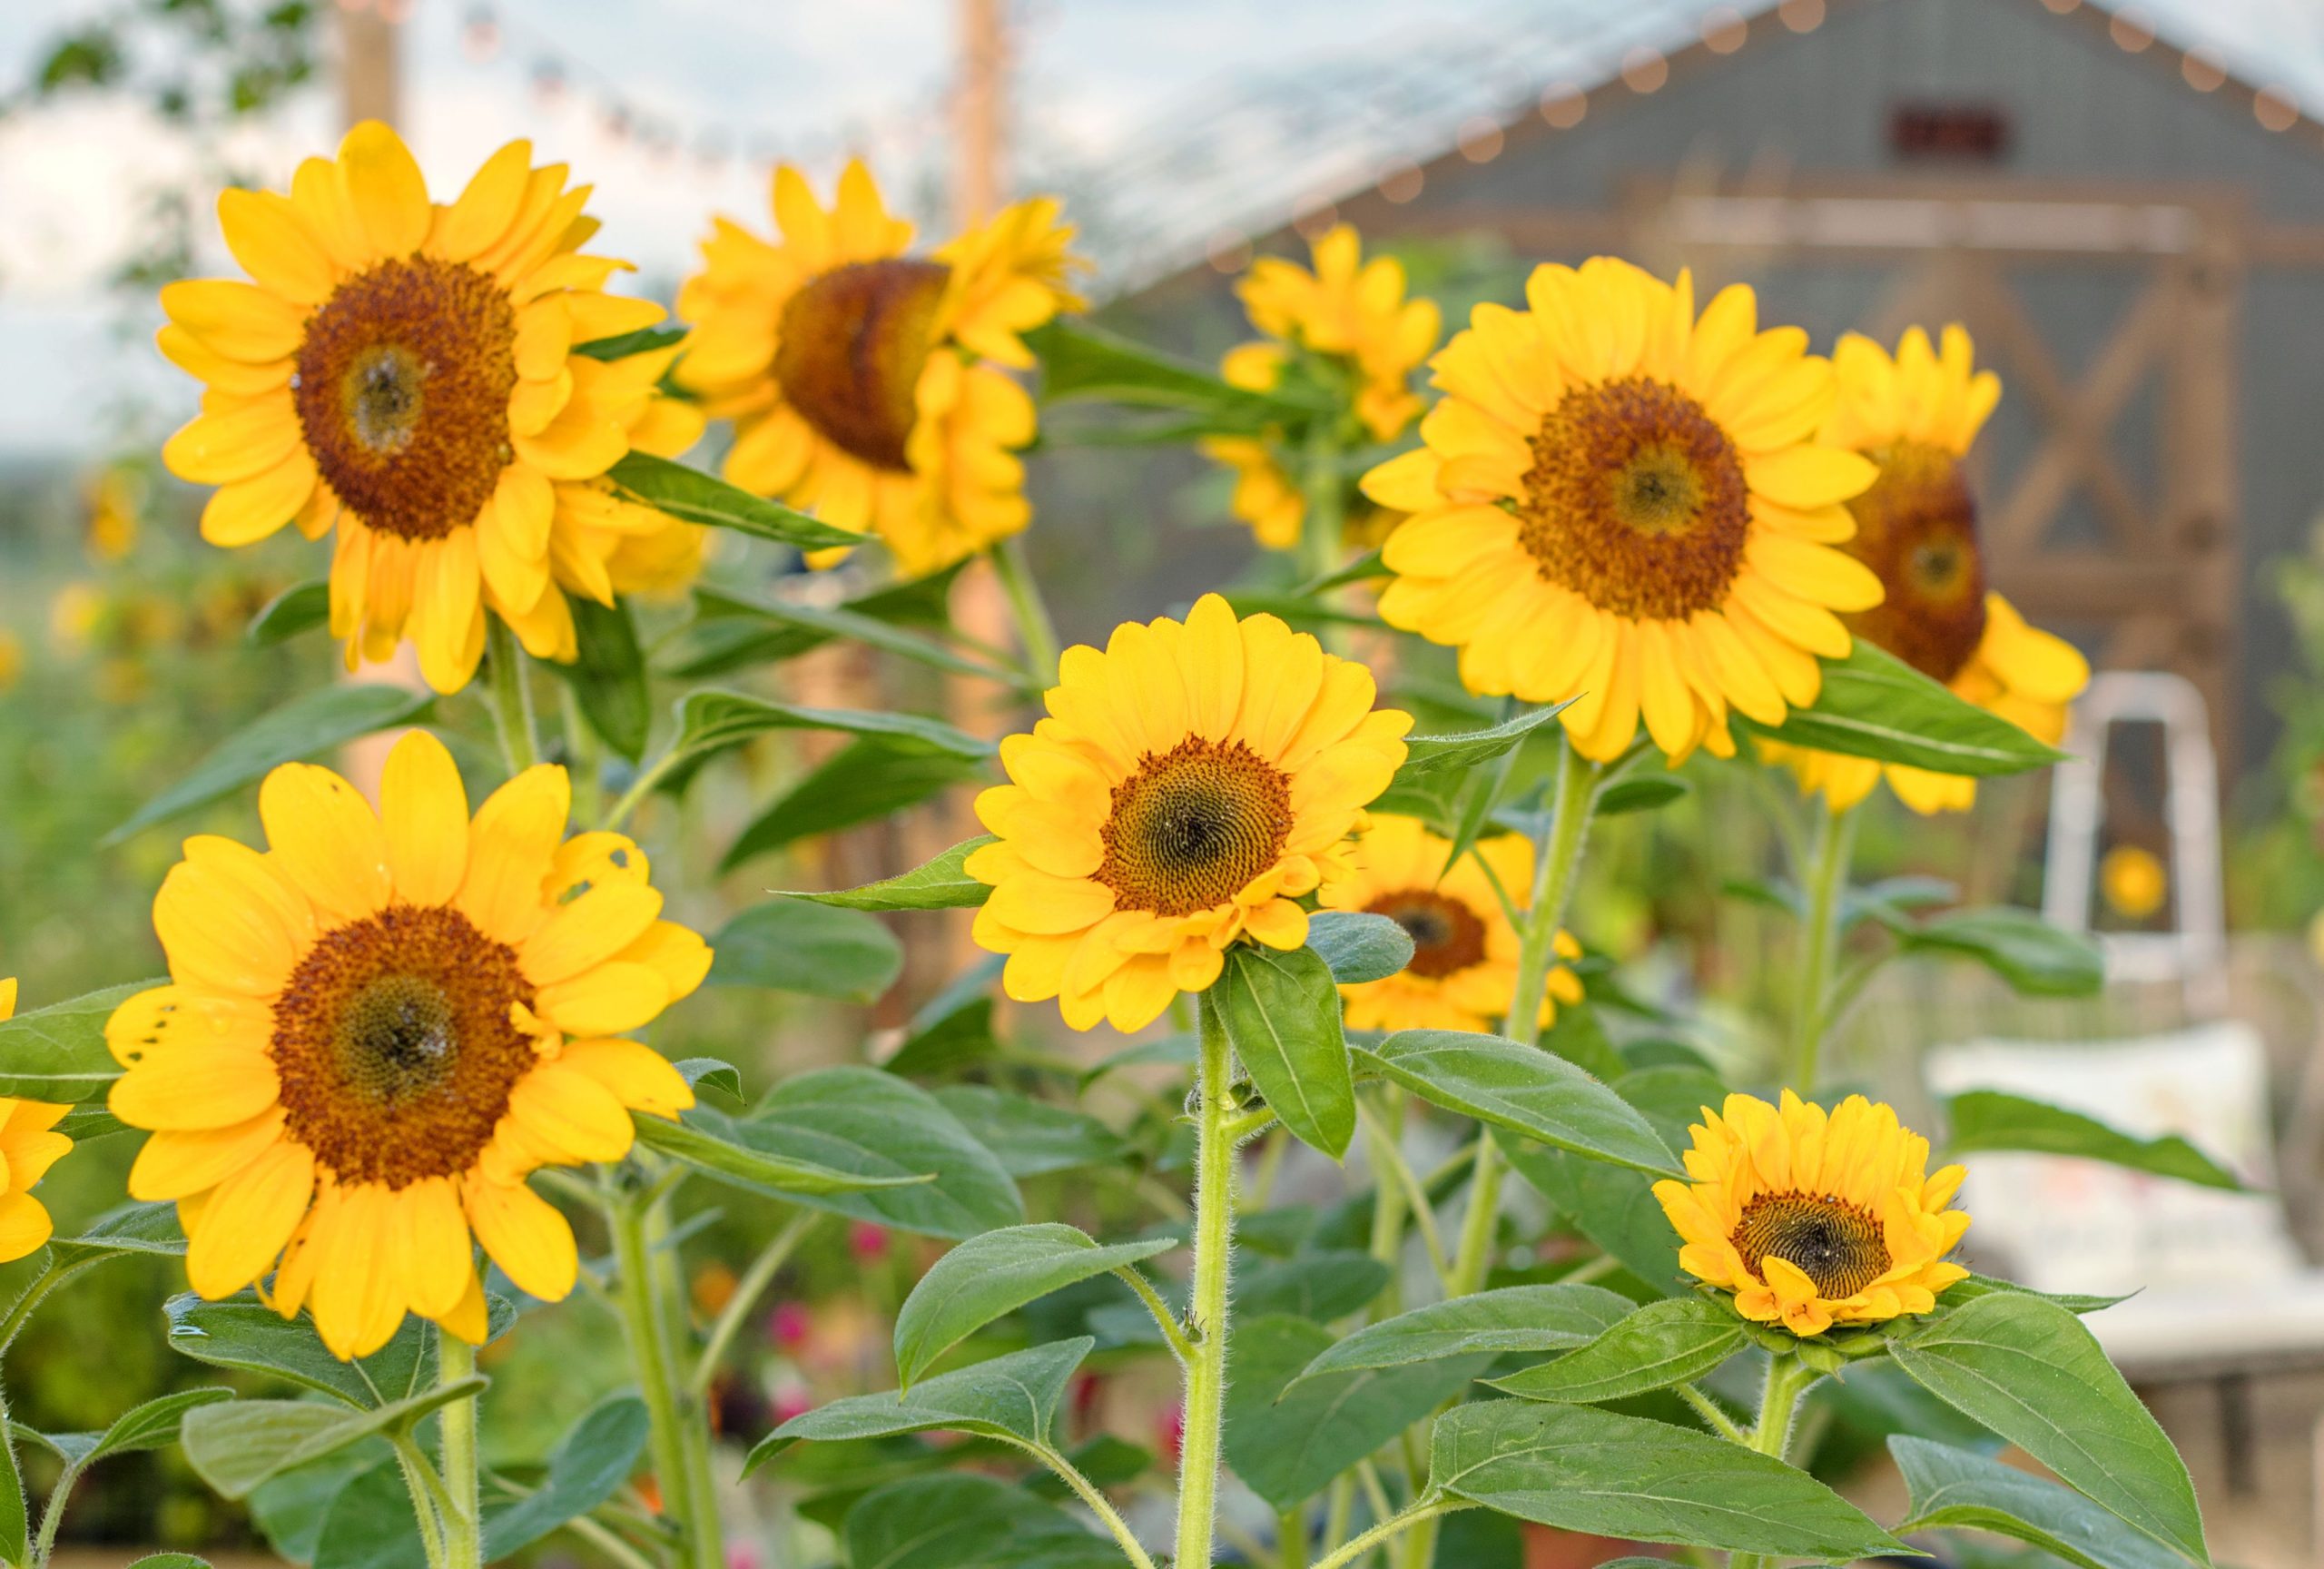 How to Make Sunflowers Grow Faster